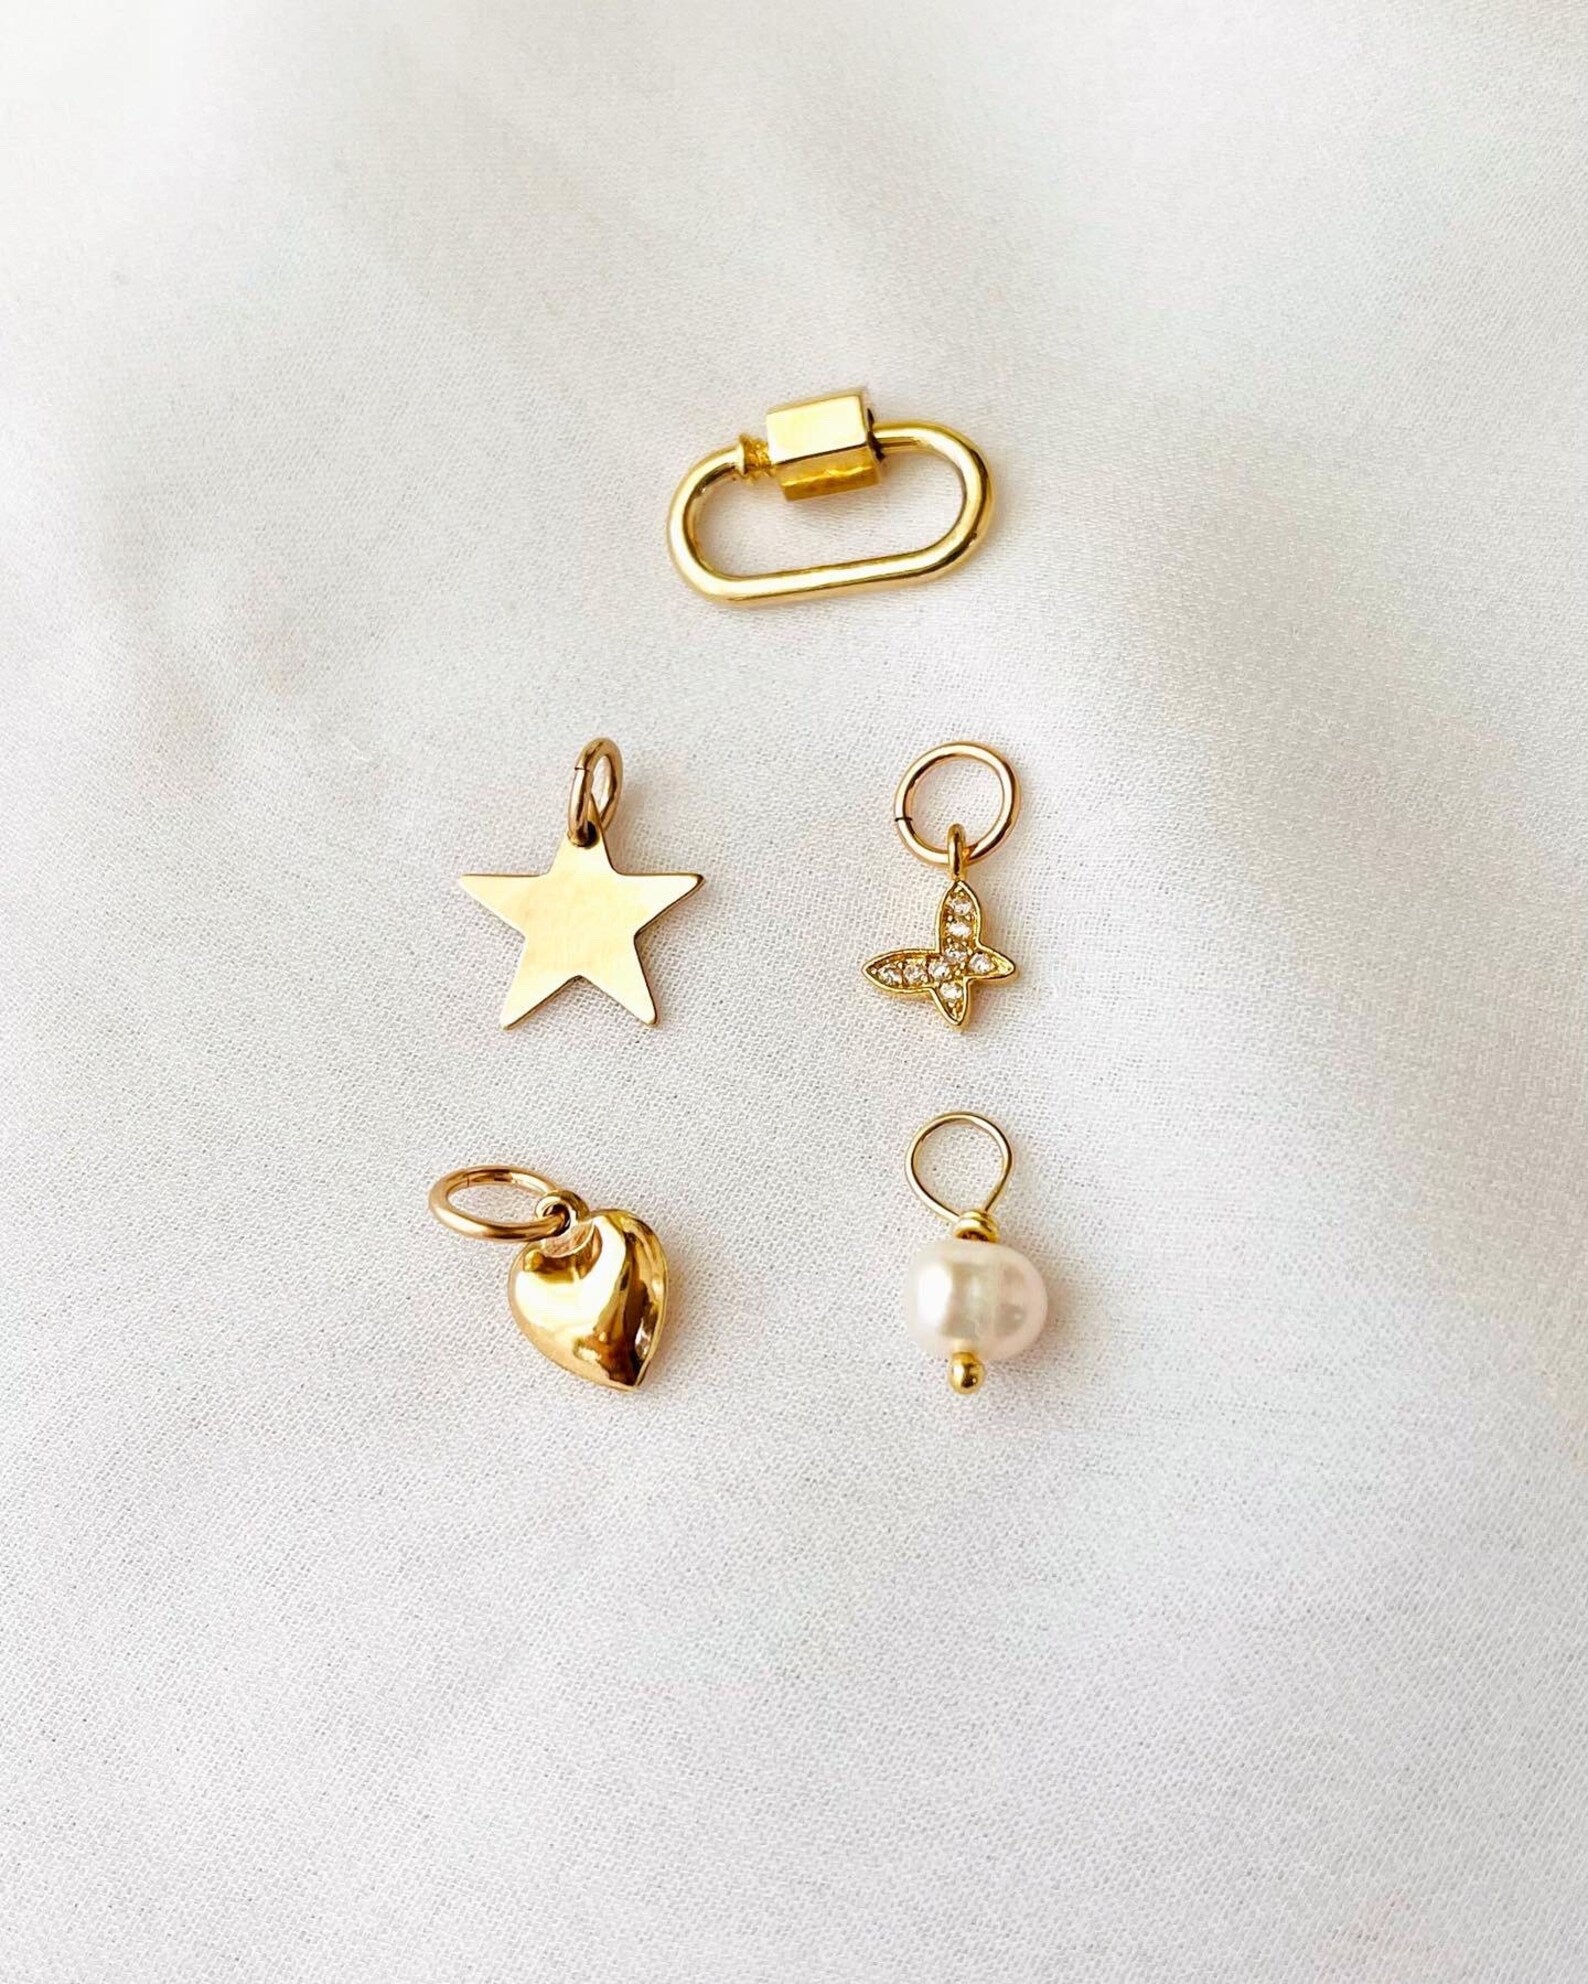 Star charm, Pearl Drop Charm, Heart Charm, charms, add to necklace, add to bracelet